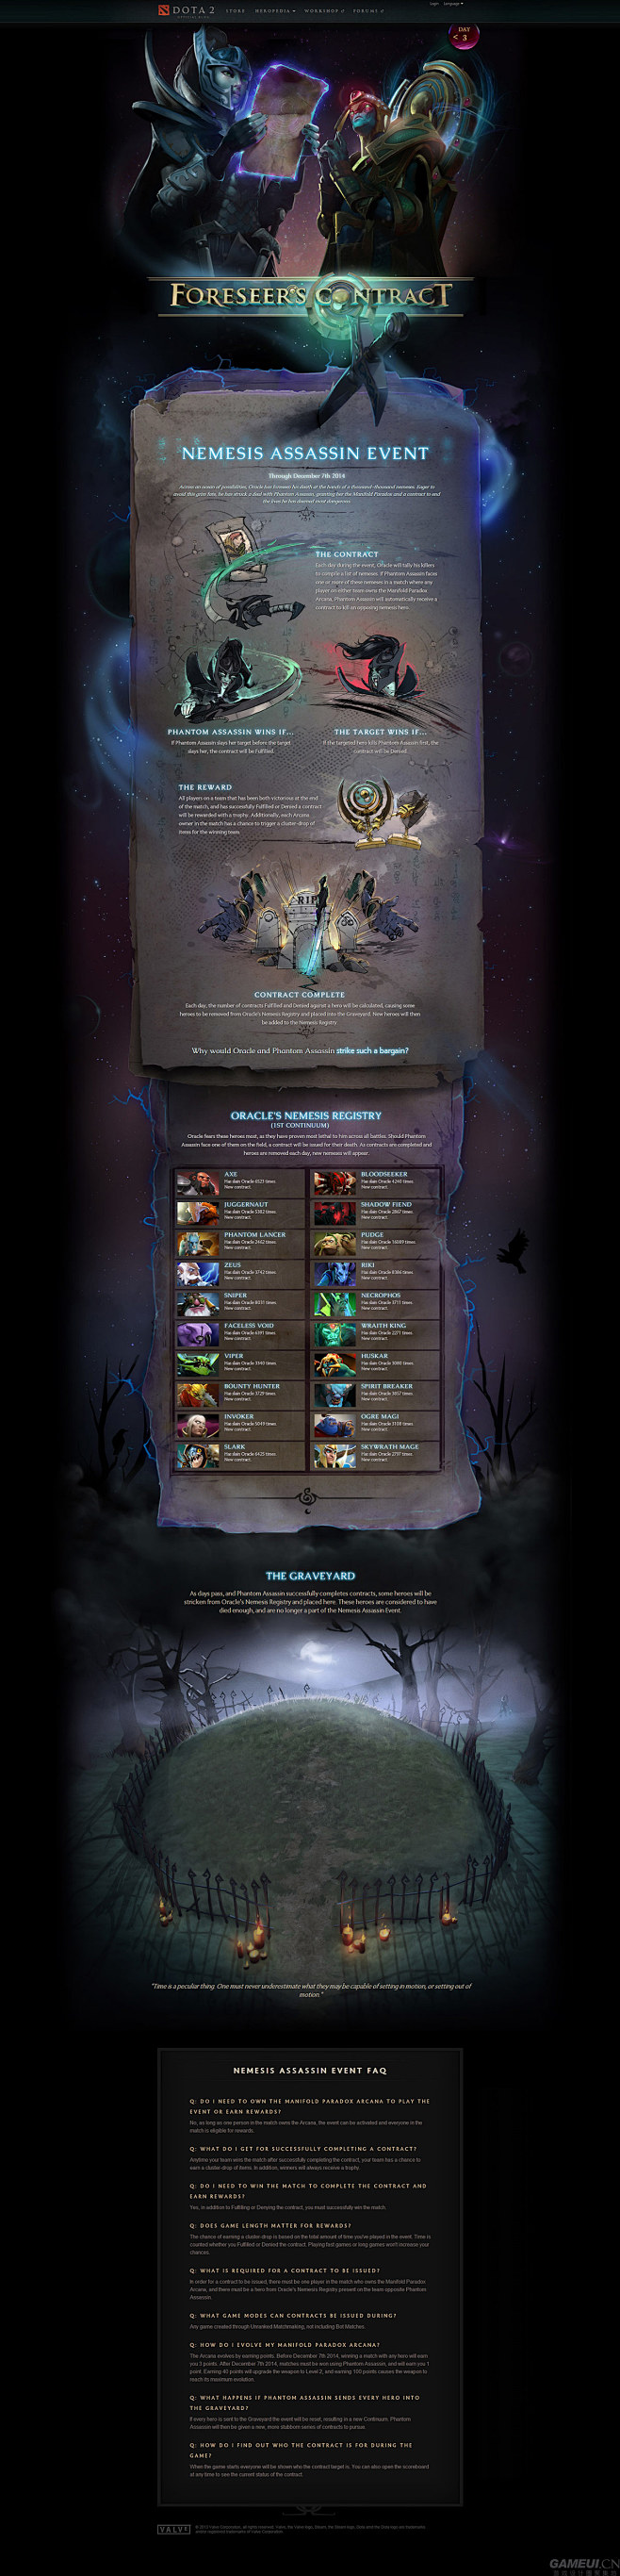 Dota2 Foreseers cont...